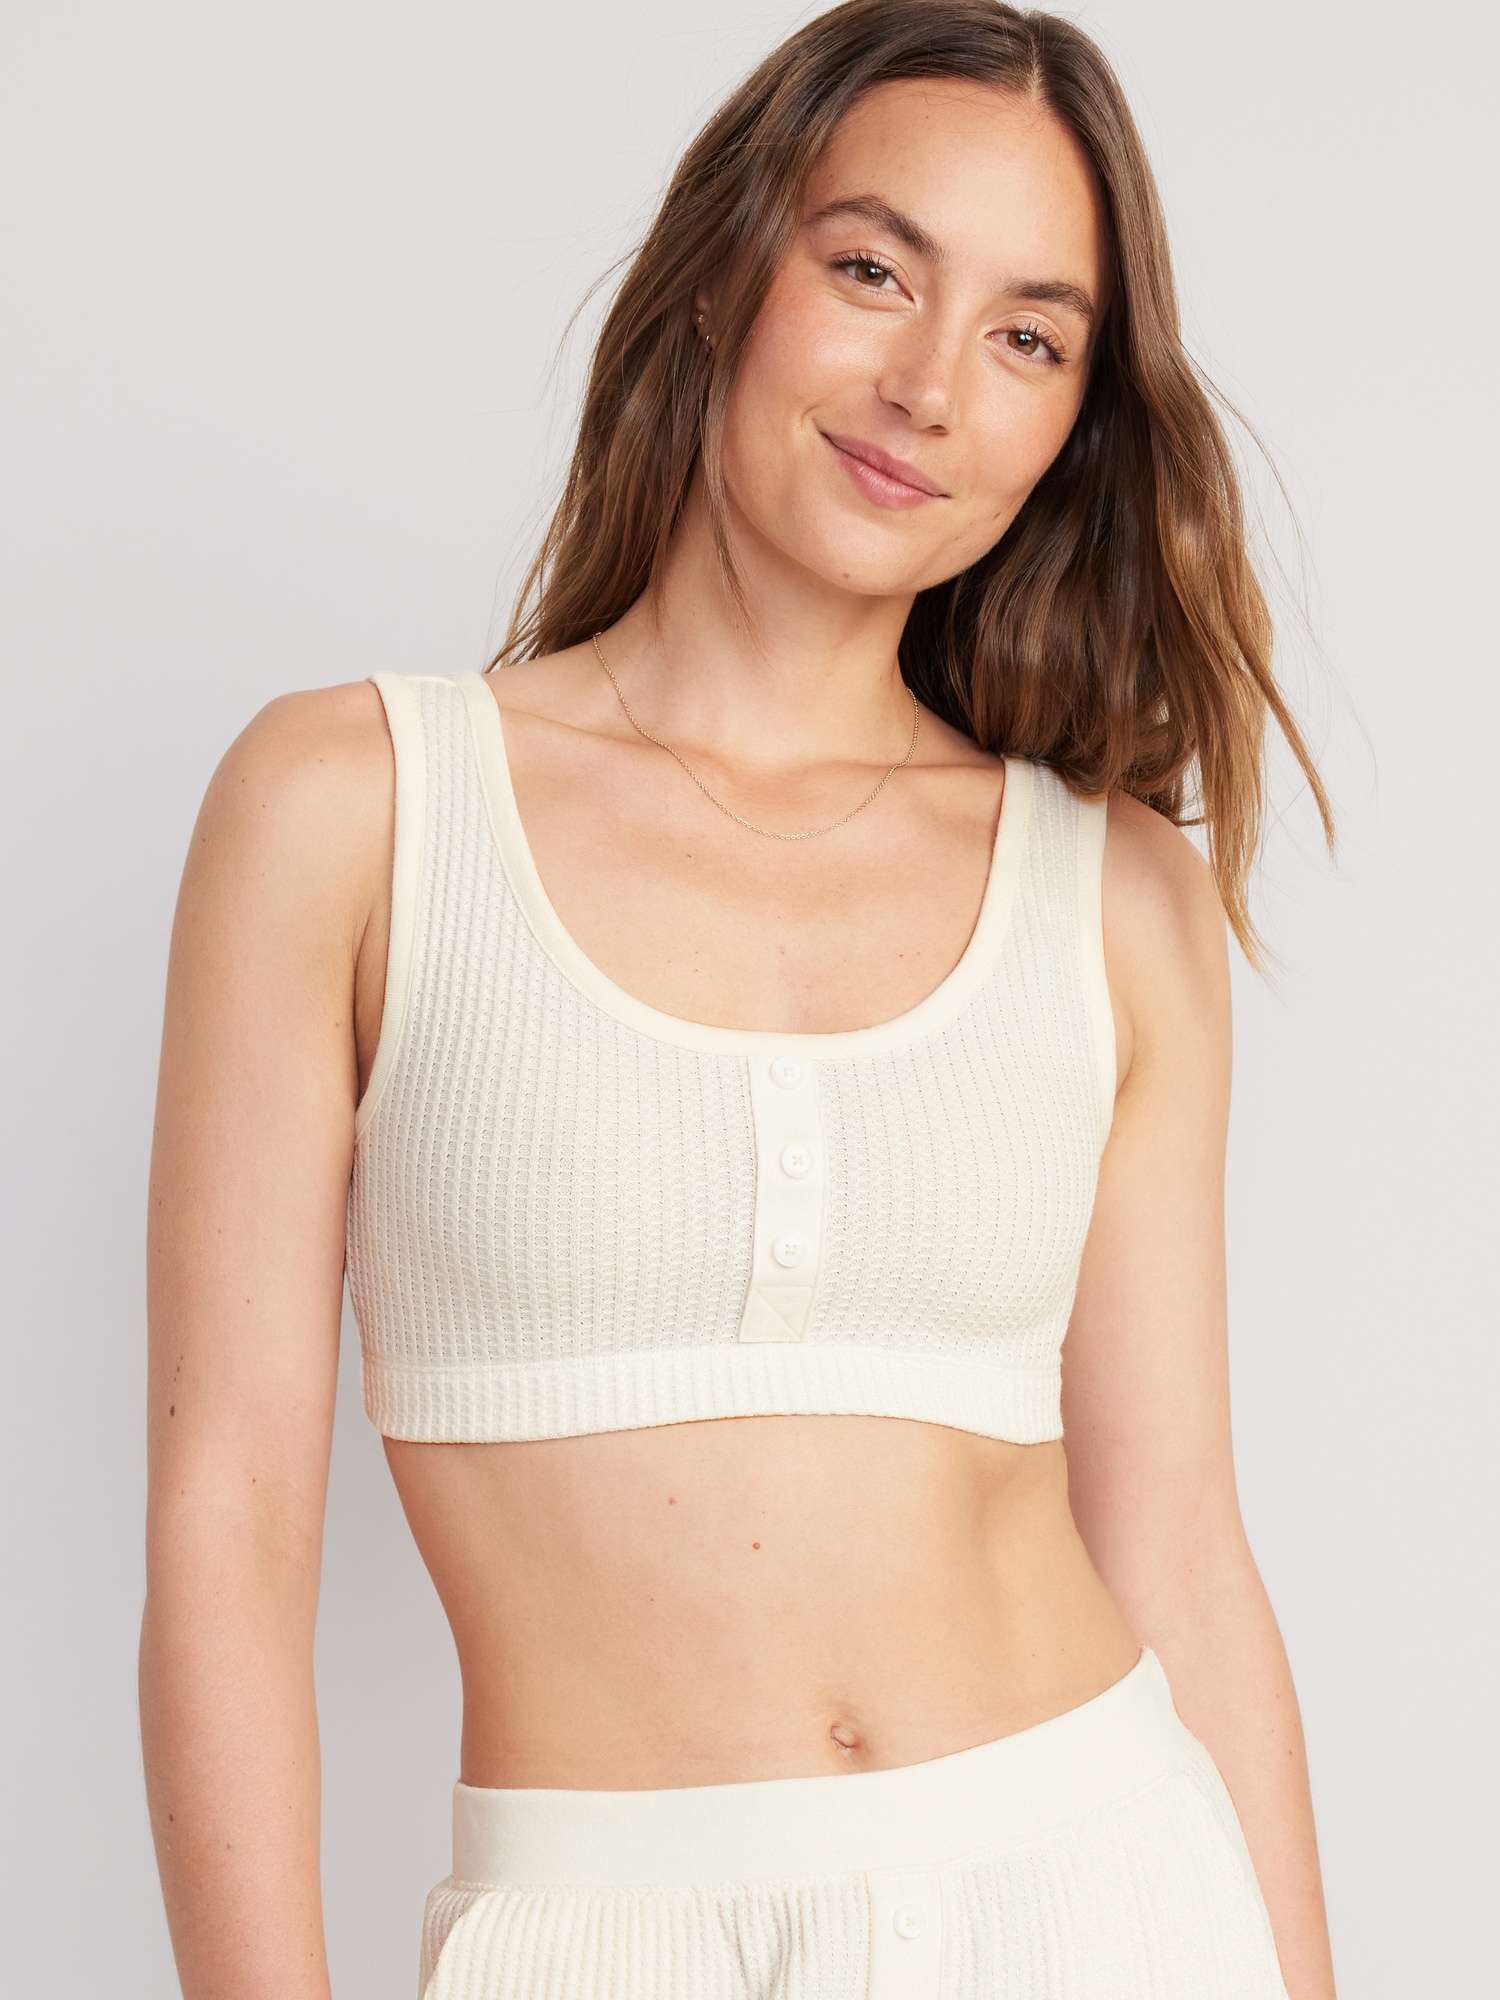 Waffle-Knit Pajama Cami Bralette Top for Women